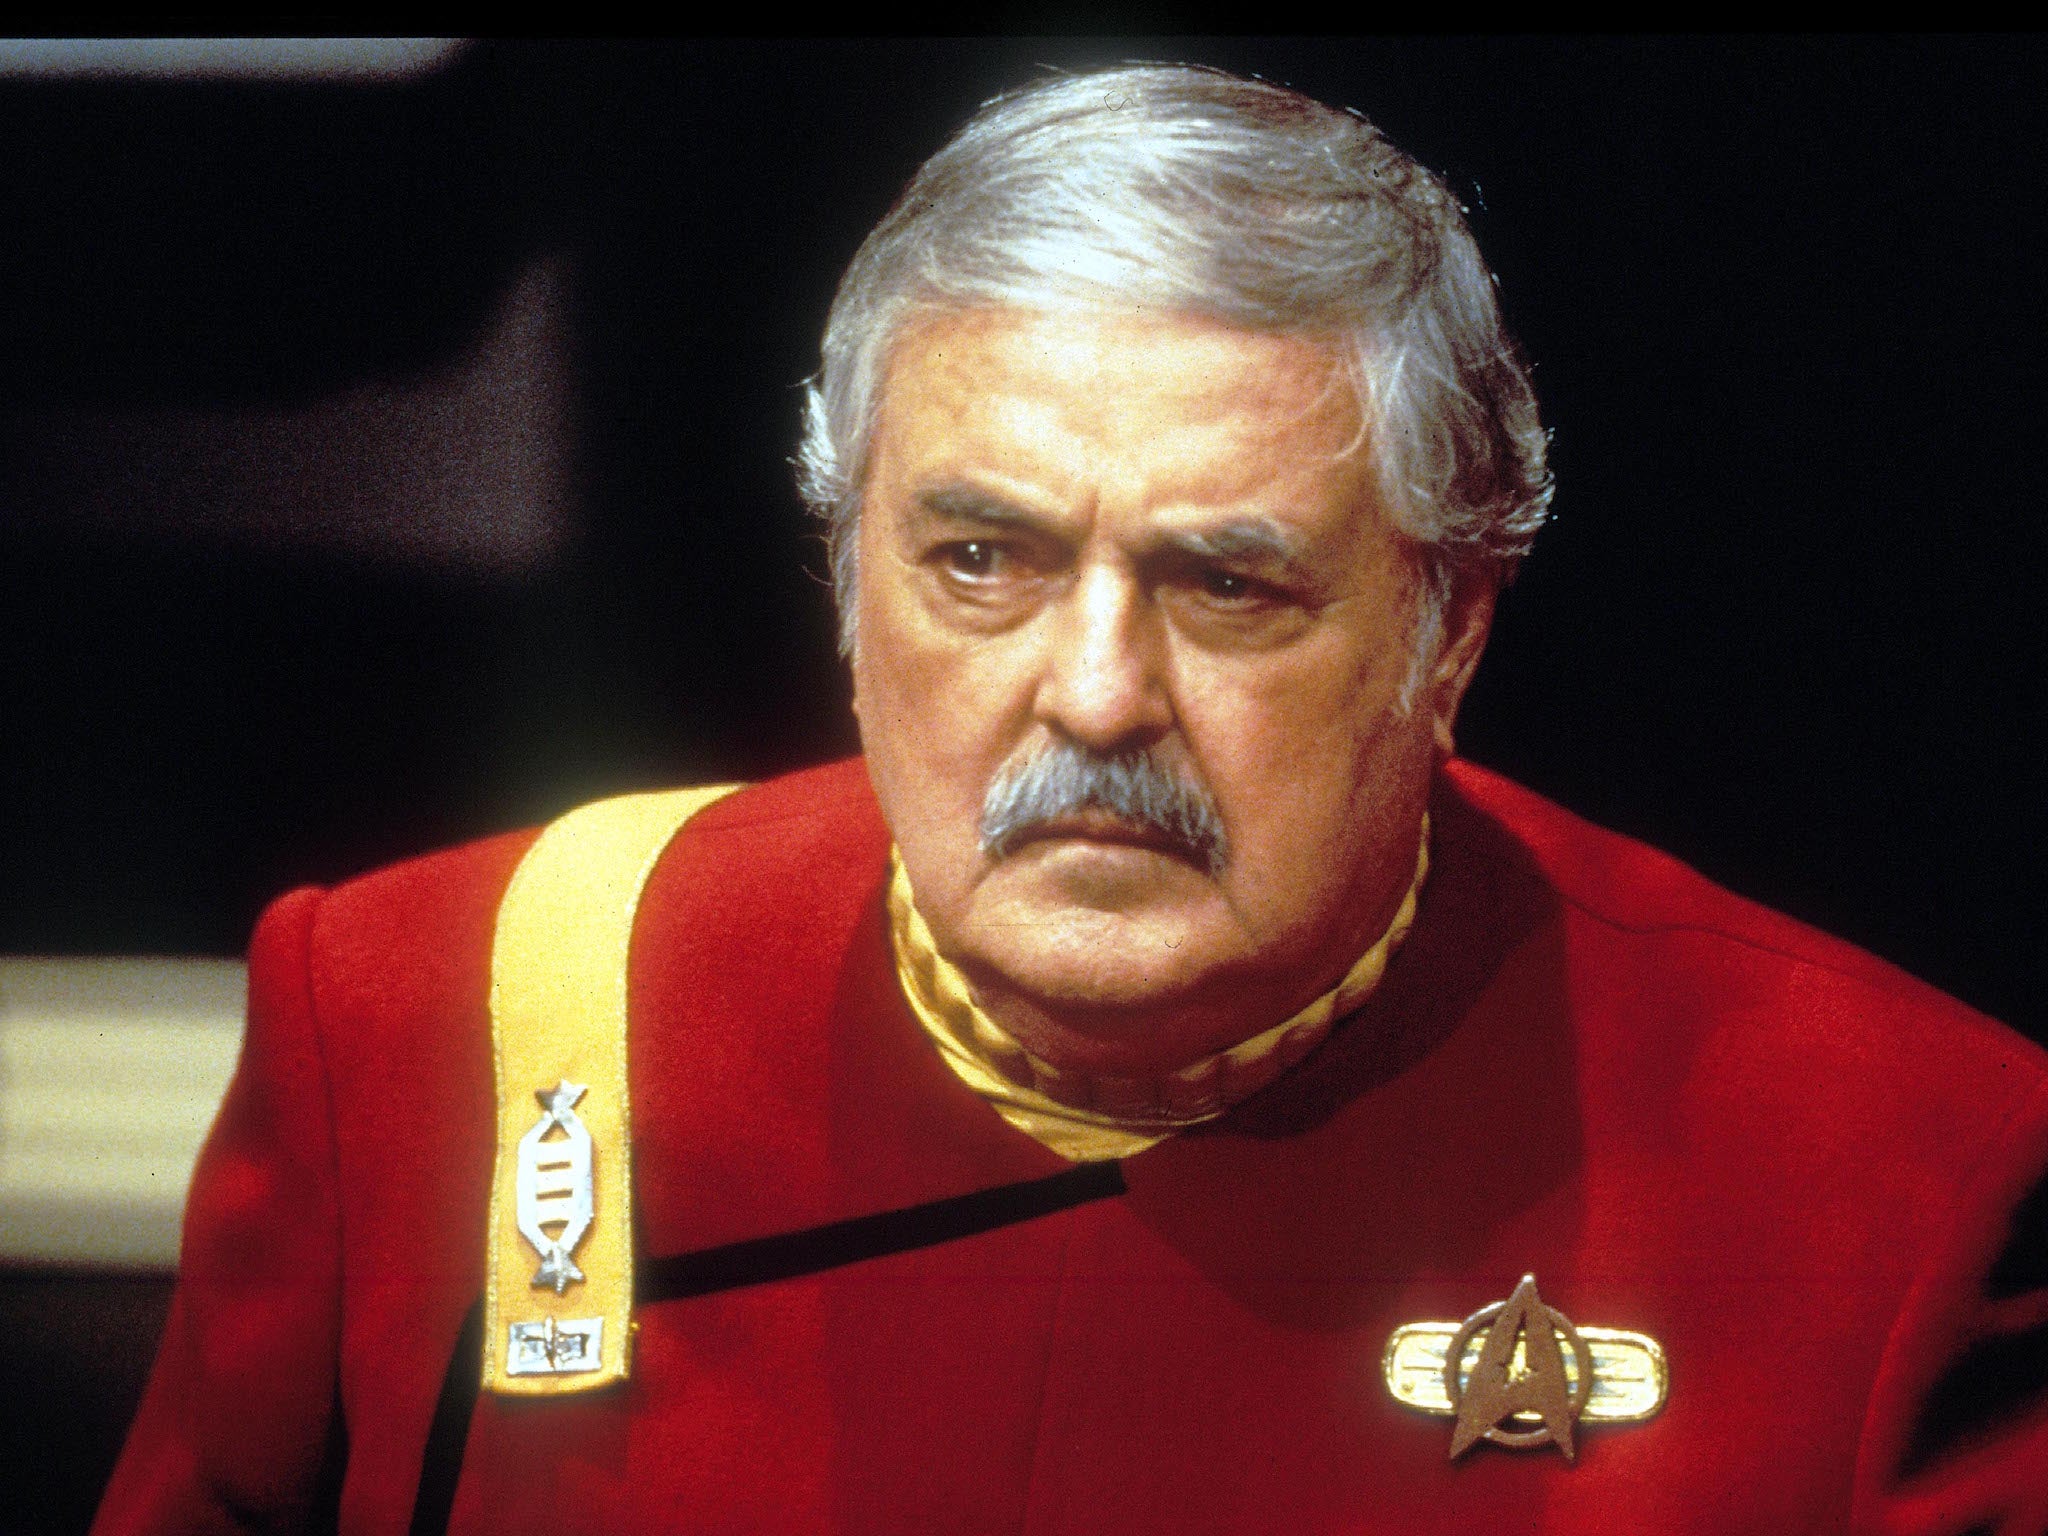 Star Trek' Scotty: James Doohan's ashes smuggled on Space Station